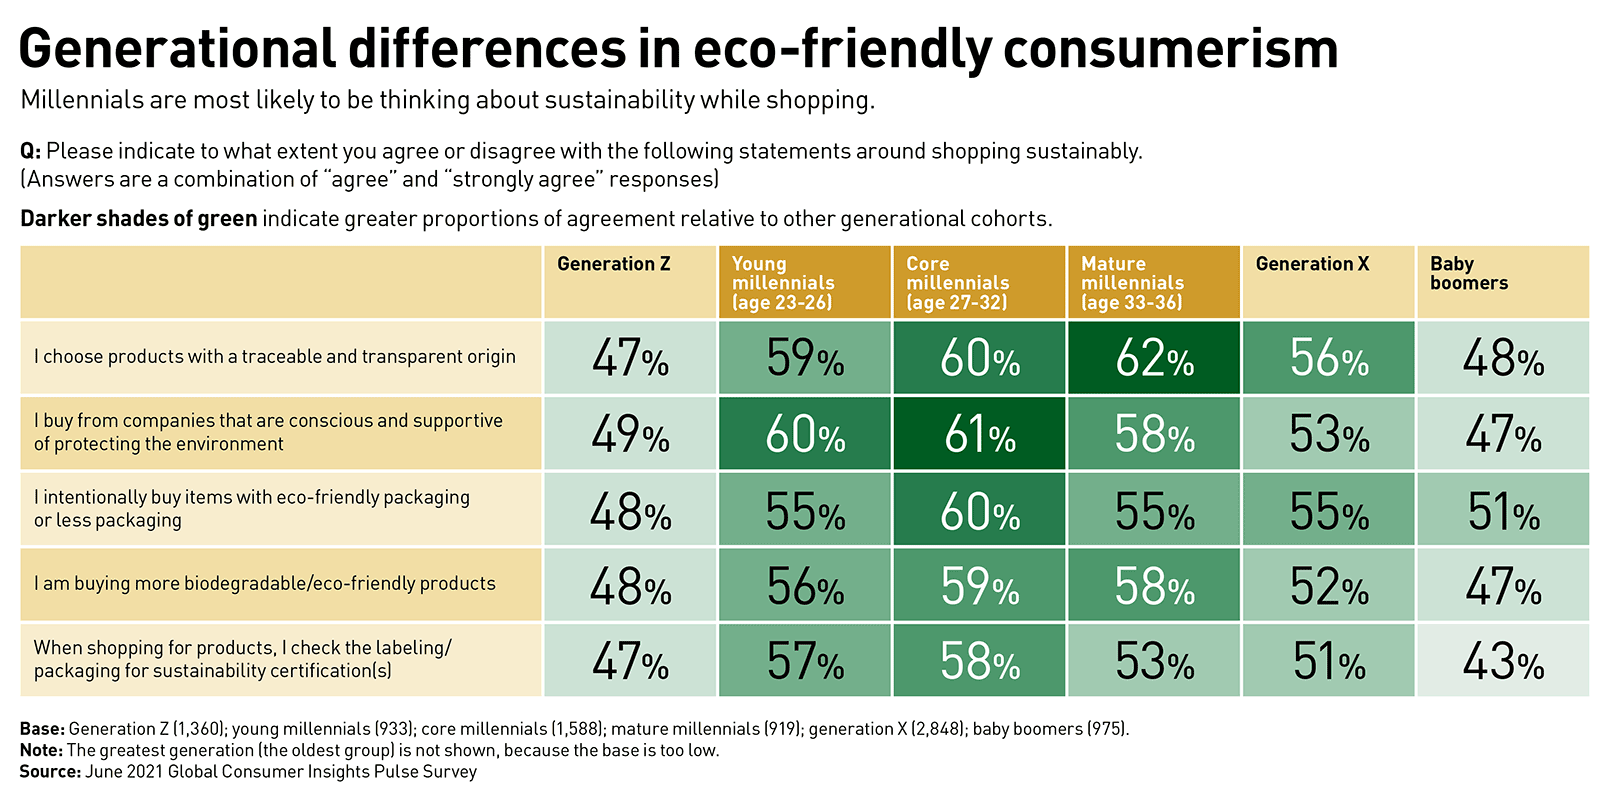 A chart showing generational differences in eco-friendly consumerism. Millennials are most likely to be thinking about sustainability while shopping. 